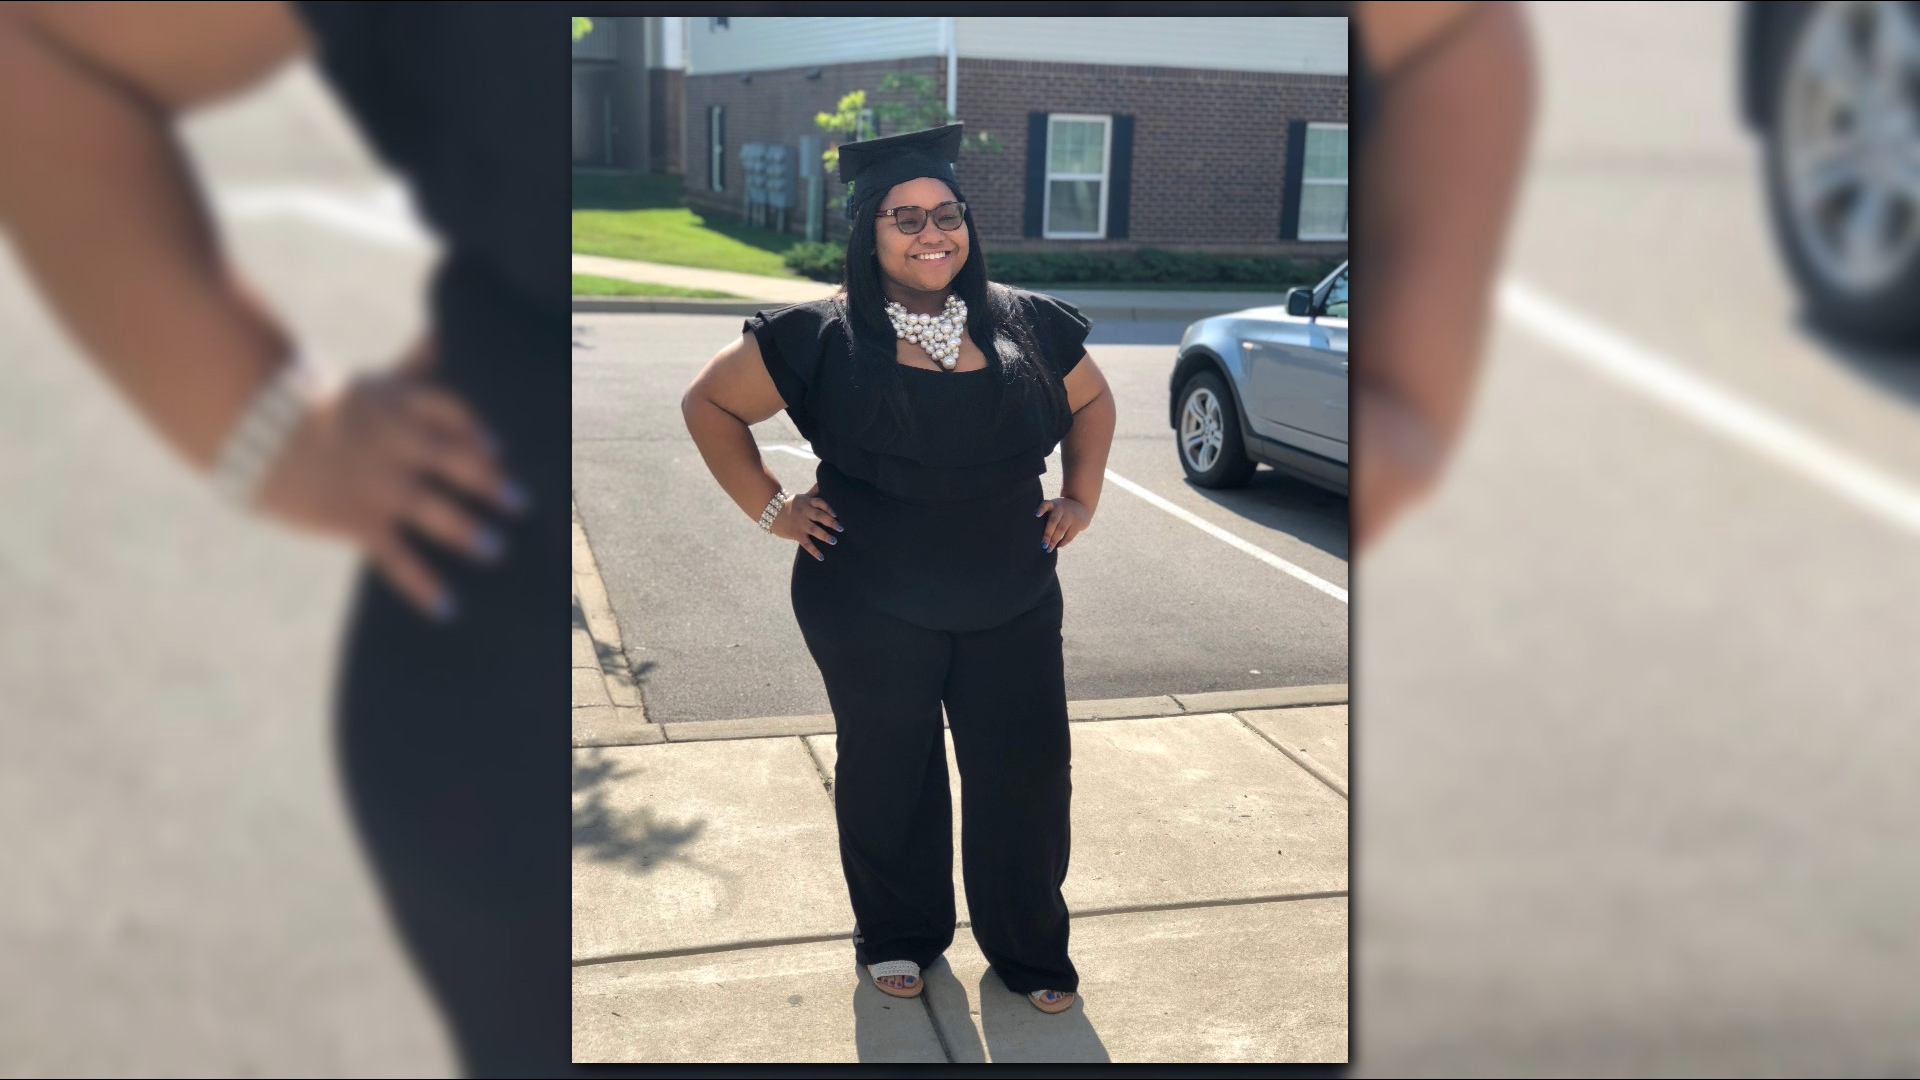 Kelsie Small, 19, was shot and killed on May 9, 2020. Her mother said she was driving her friends home. Small is believed to have been hit by stray bullets.